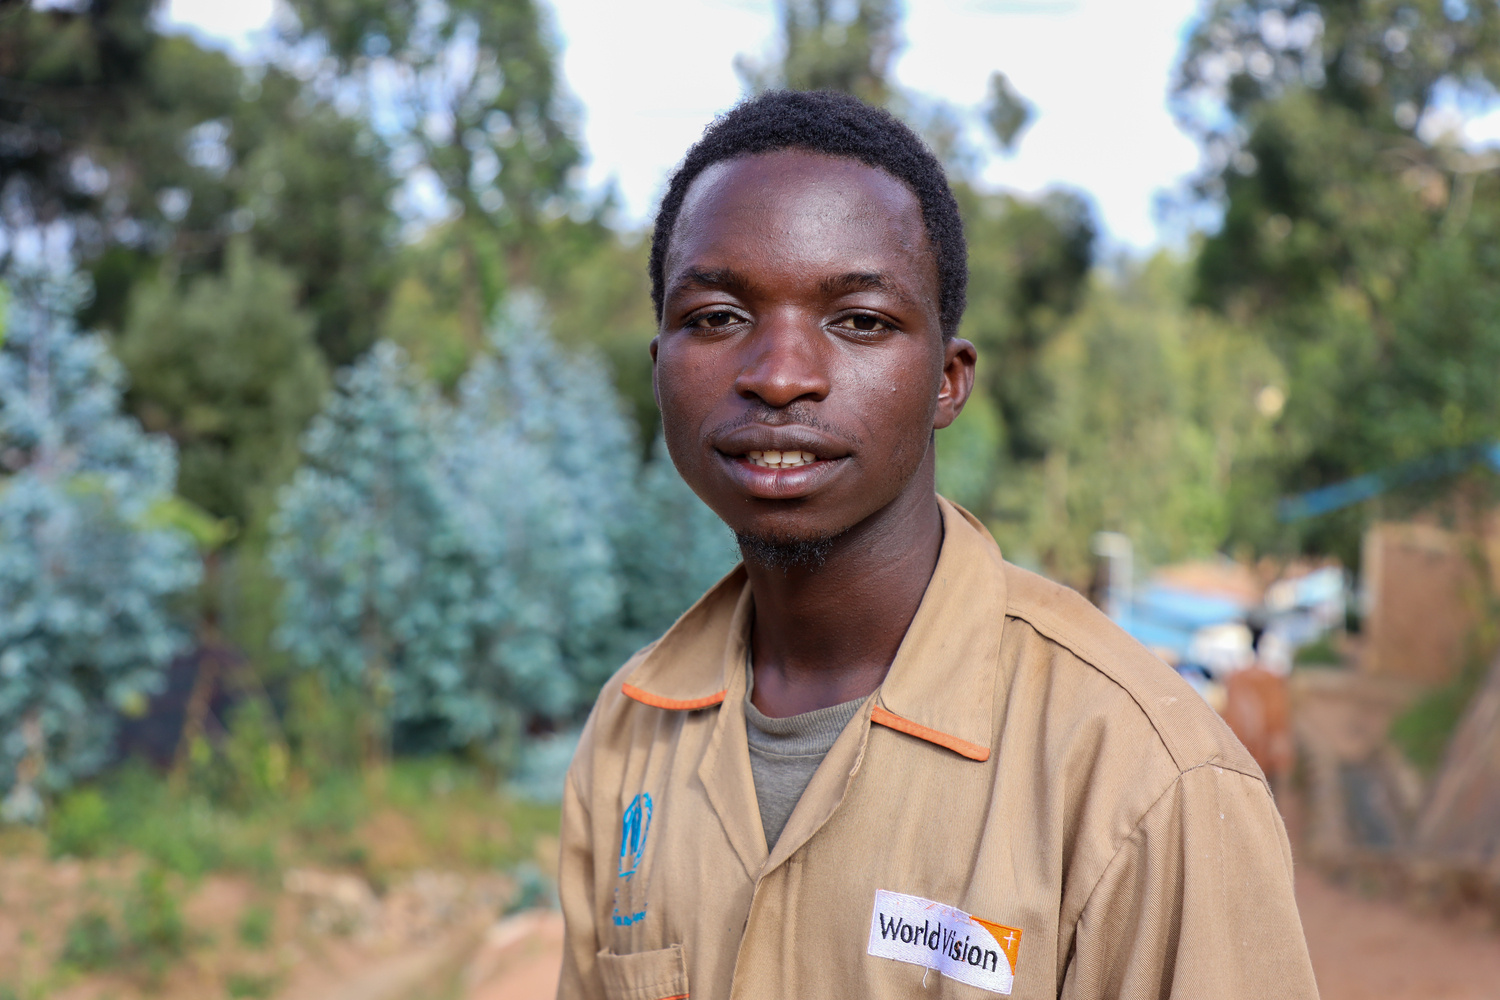 A young man in a brown shirt stands in a tree nursery in a refugee camp in Rwanda.